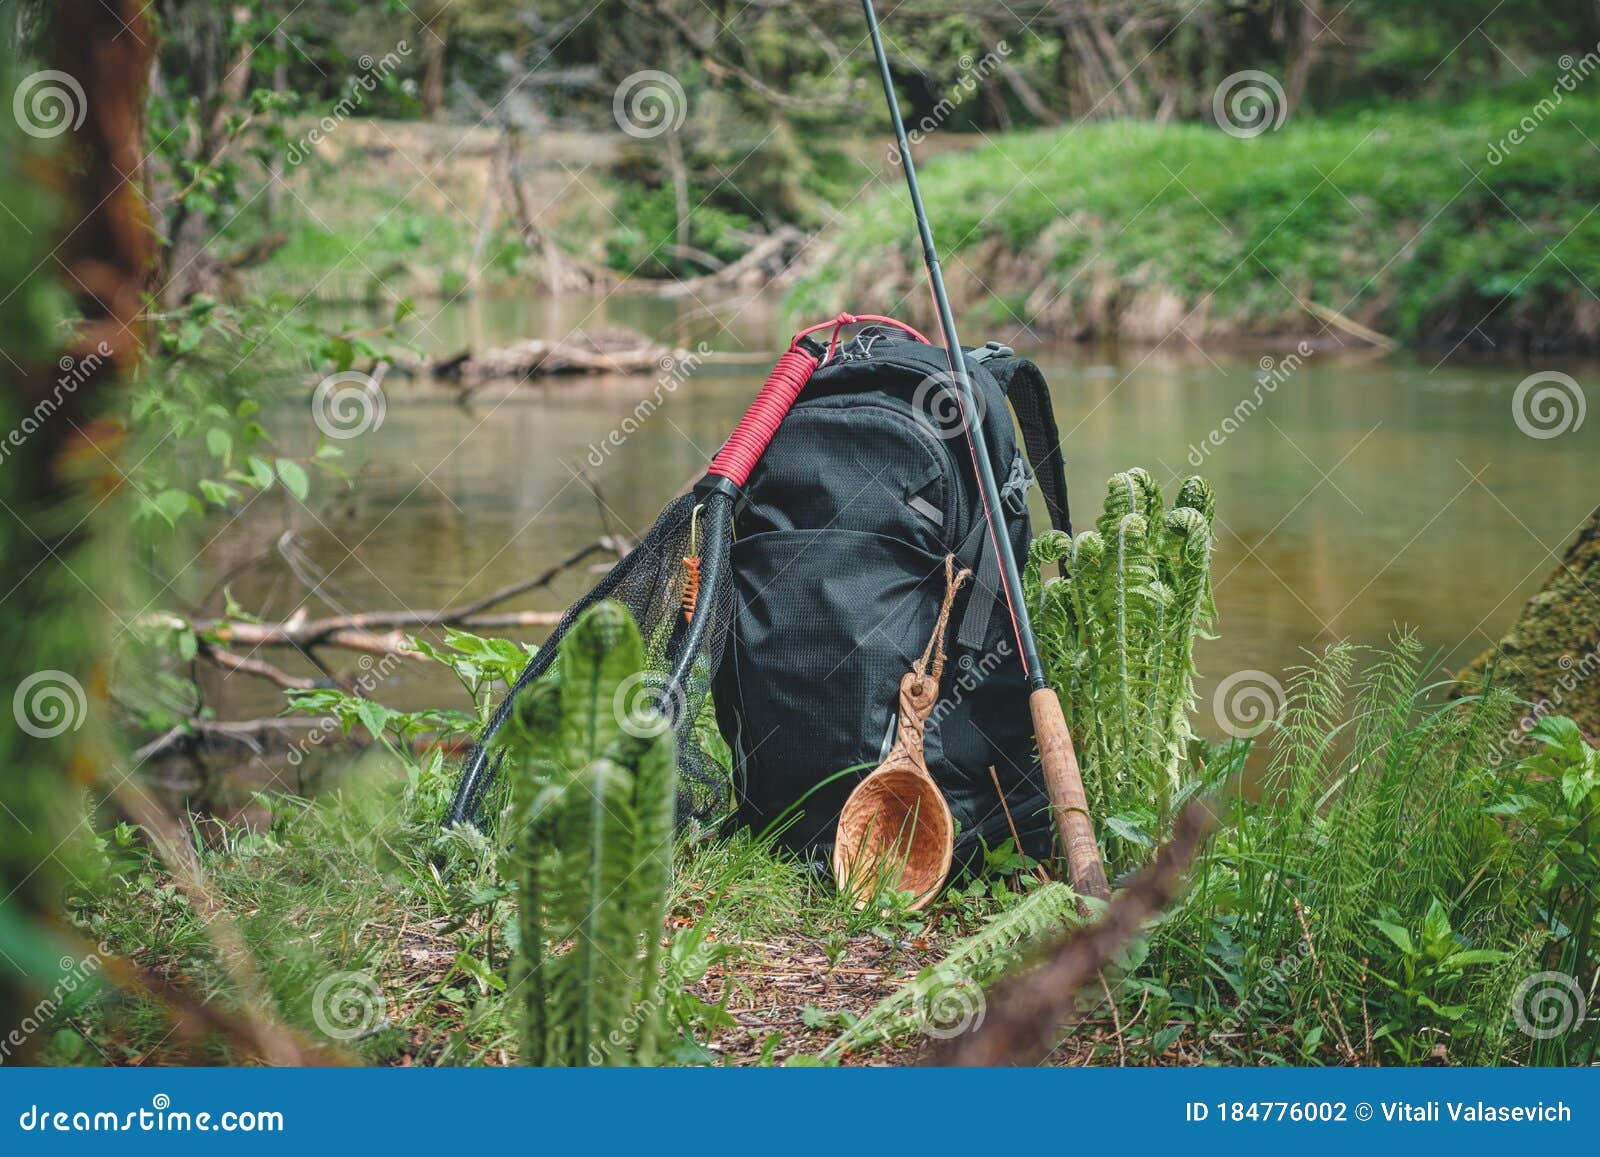 Backpack and Fishing Rod on the River. Fishing Gear Stock Photo